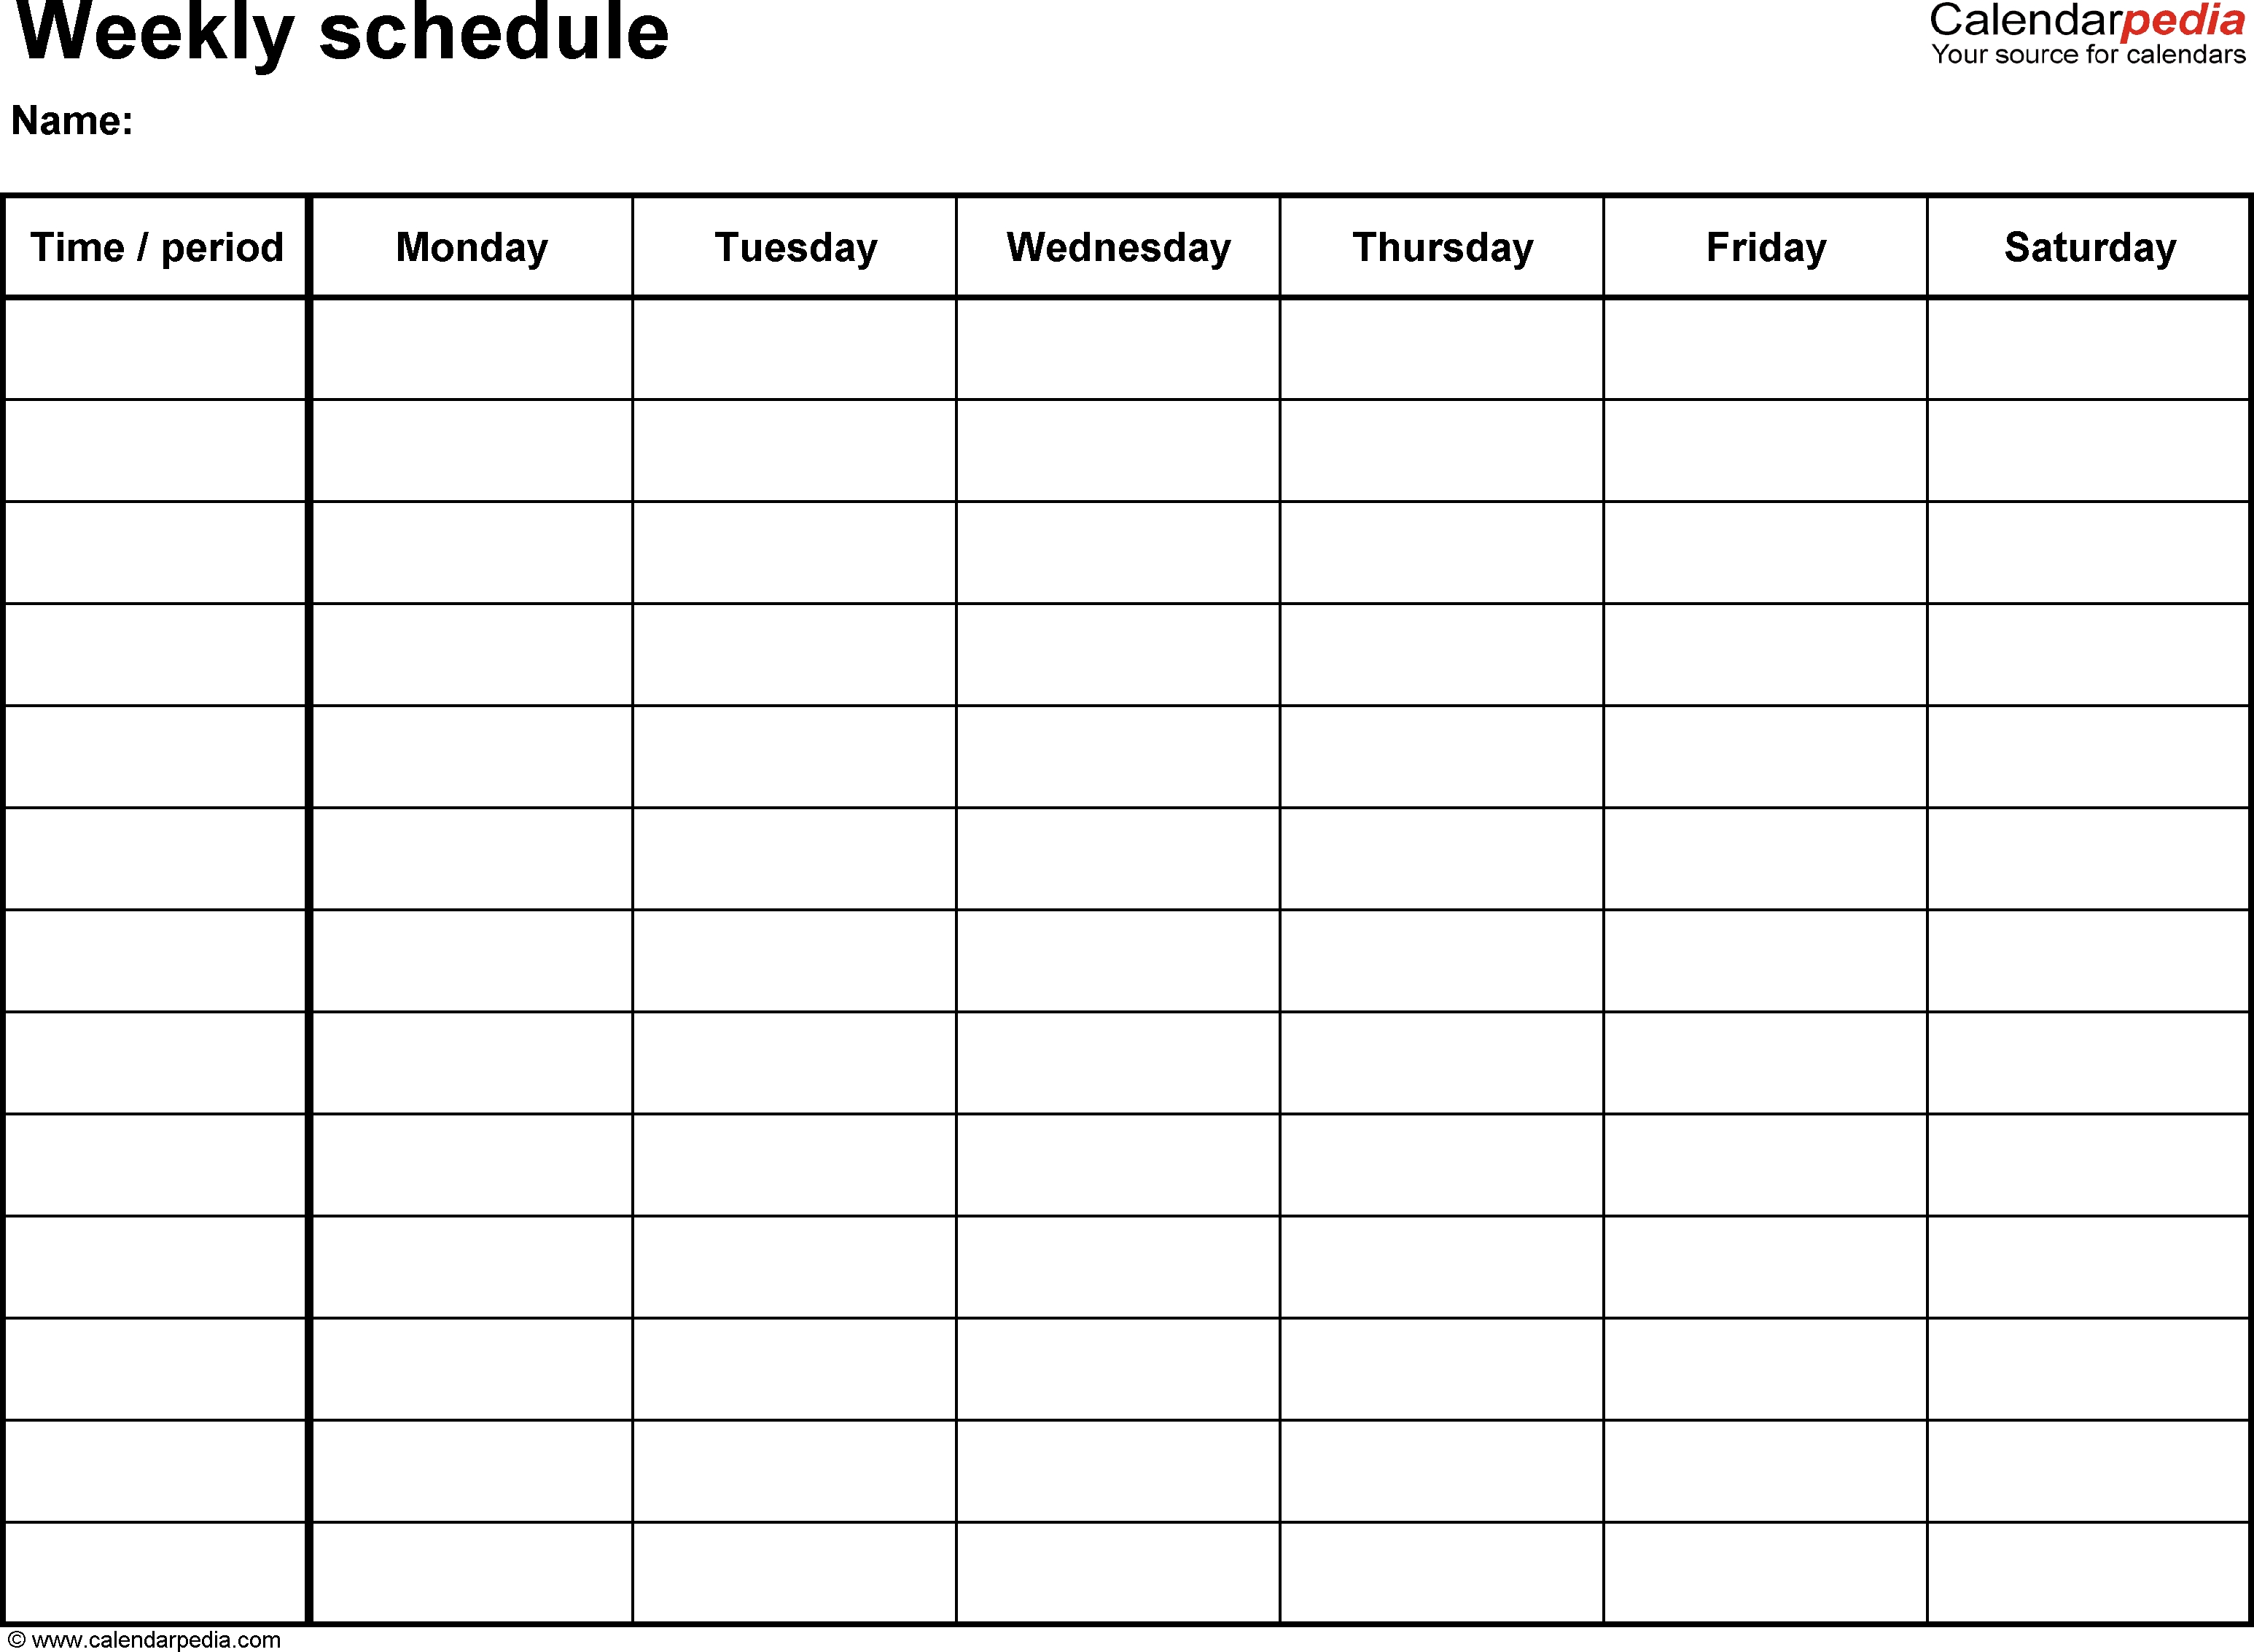 Free Weekly Schedule Templates For Word - 18 Templates intended for Blank Weekly Calendar To Fill In